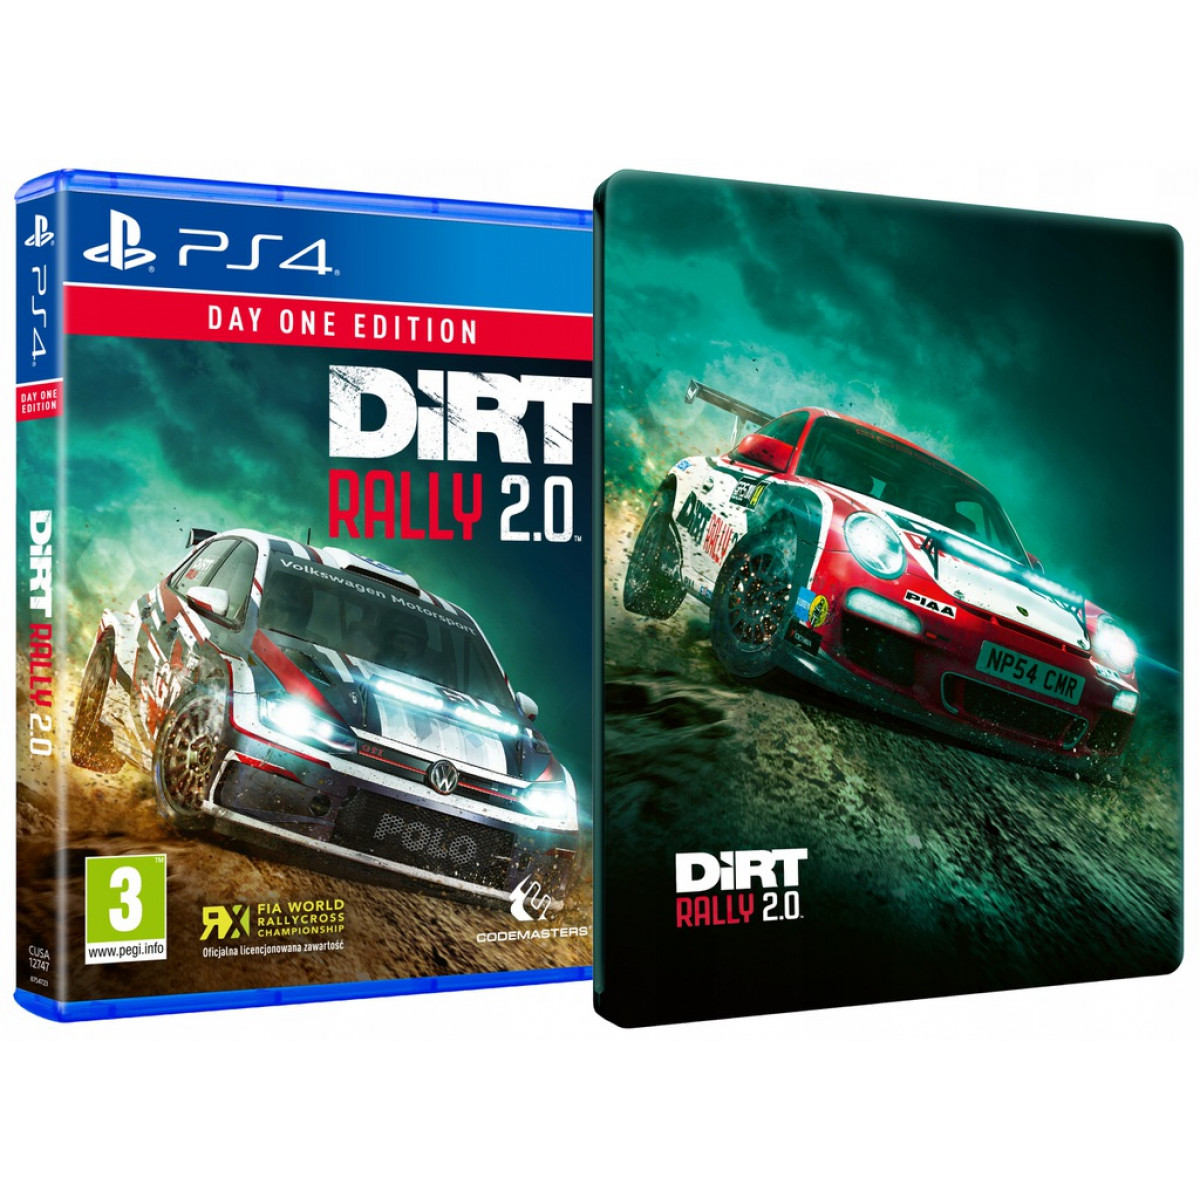 Dirt ps4. Rally 2.0 ps4. Dirt Rally 2.0 ПС 4. Dirt Rally 2.0 ps4 обложка. Dirt Rally 2.0 ps4 диск.